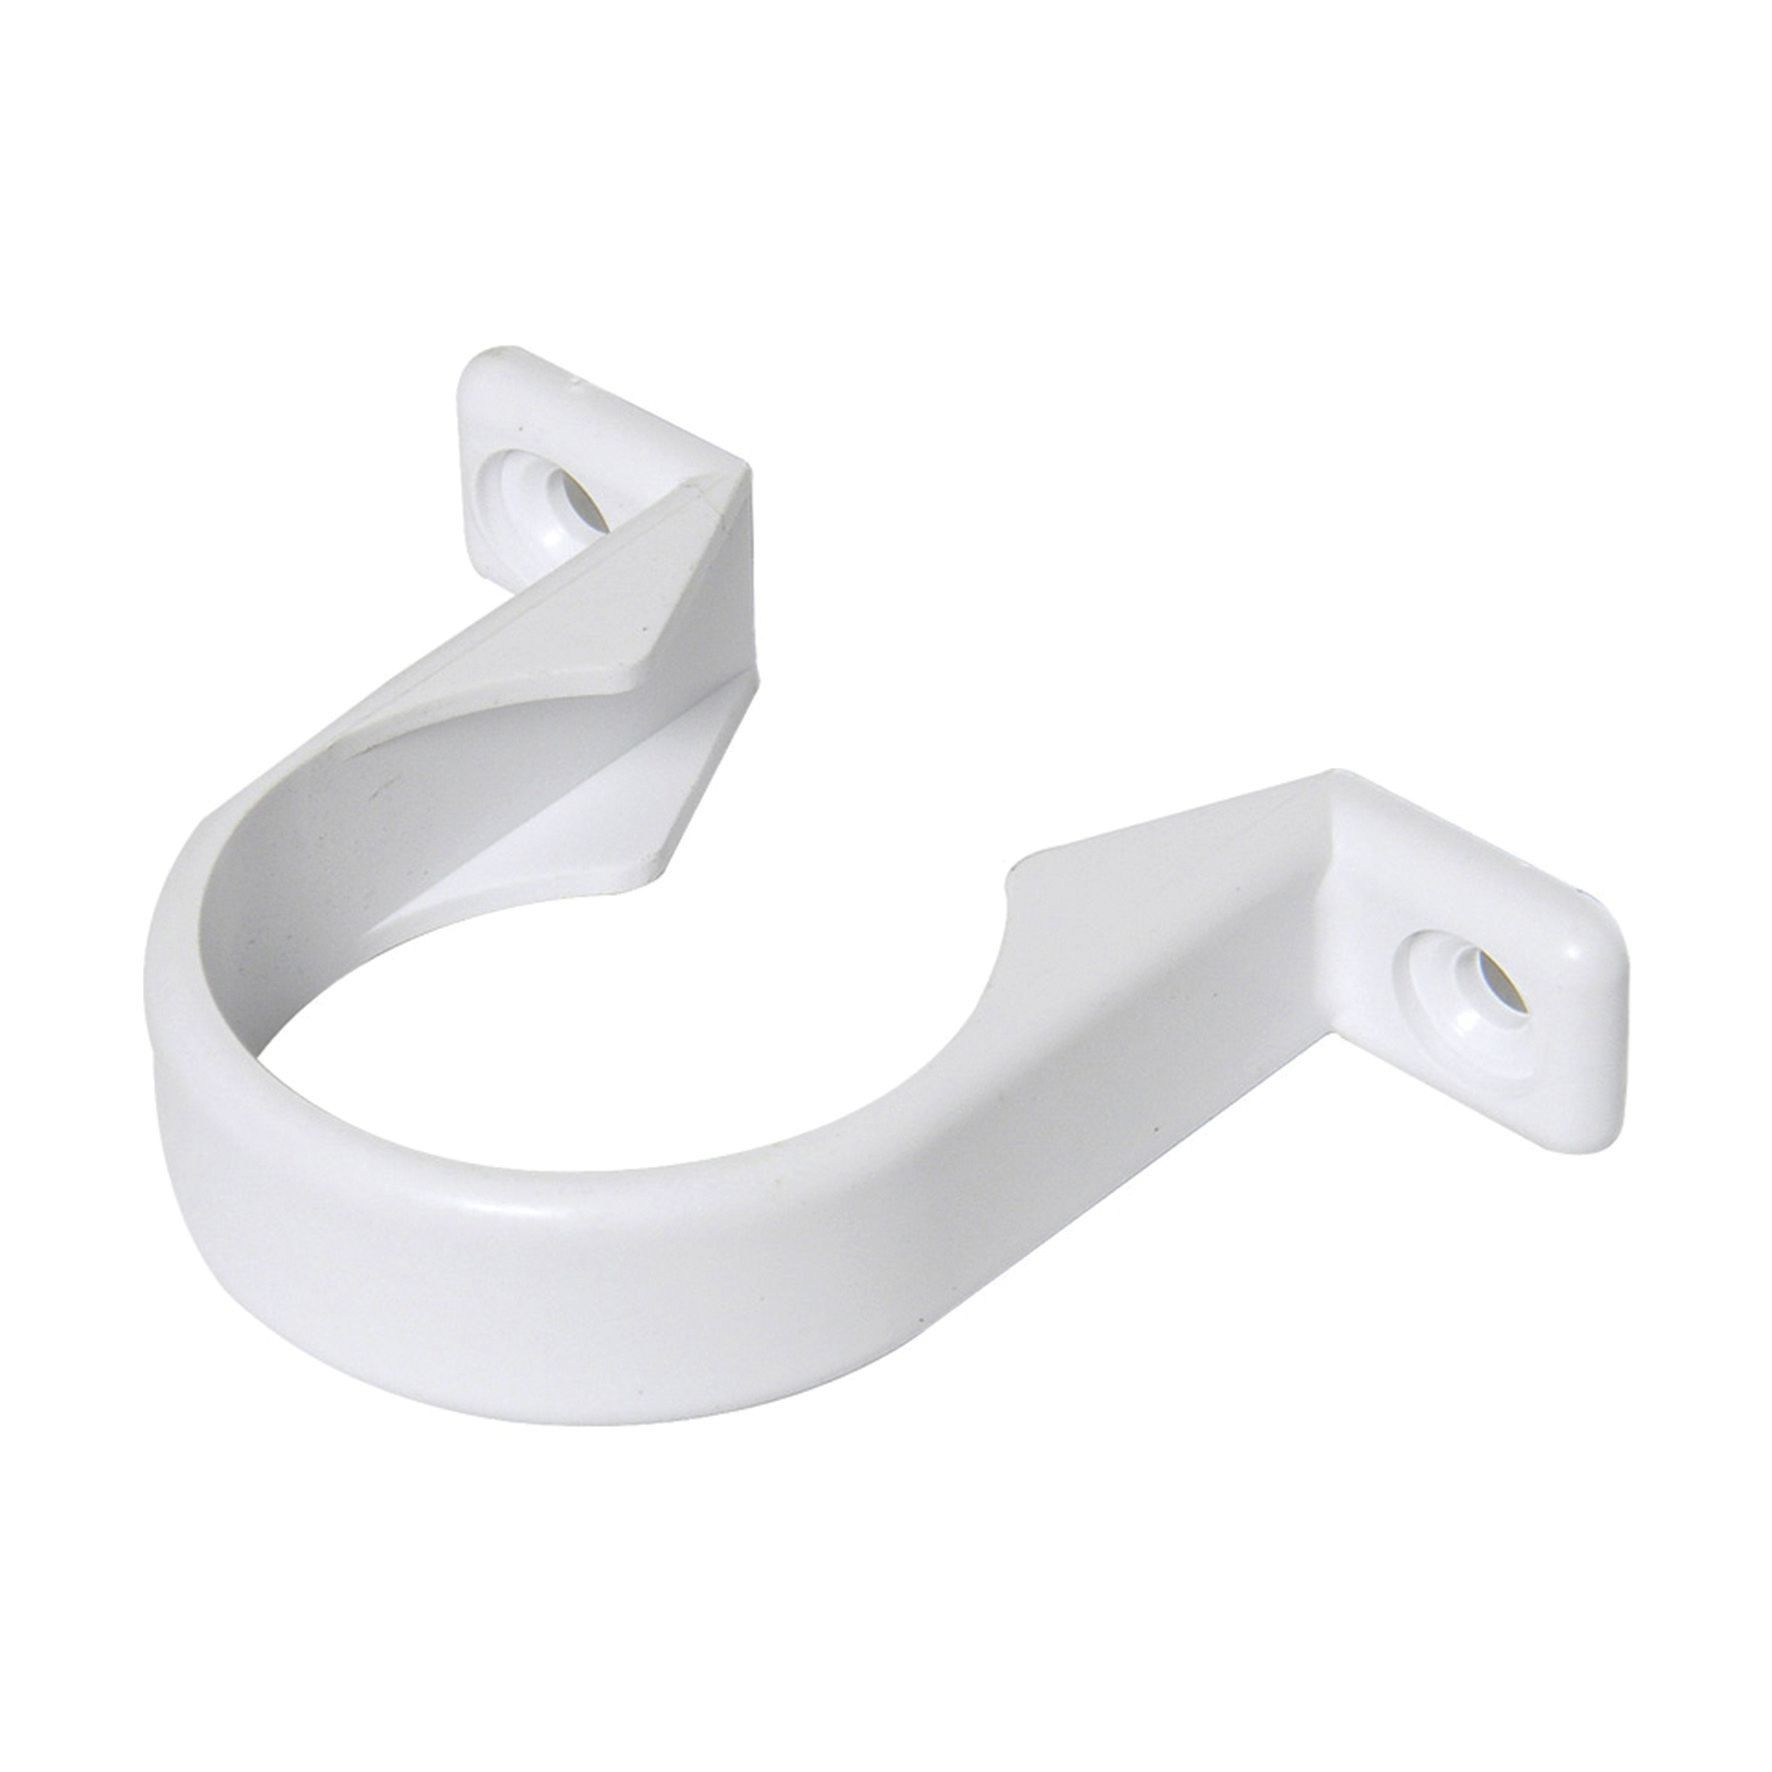 Image of FloPlast WS34W Solvent Weld Waste Pipe Clips - White 32mm Pack of 3